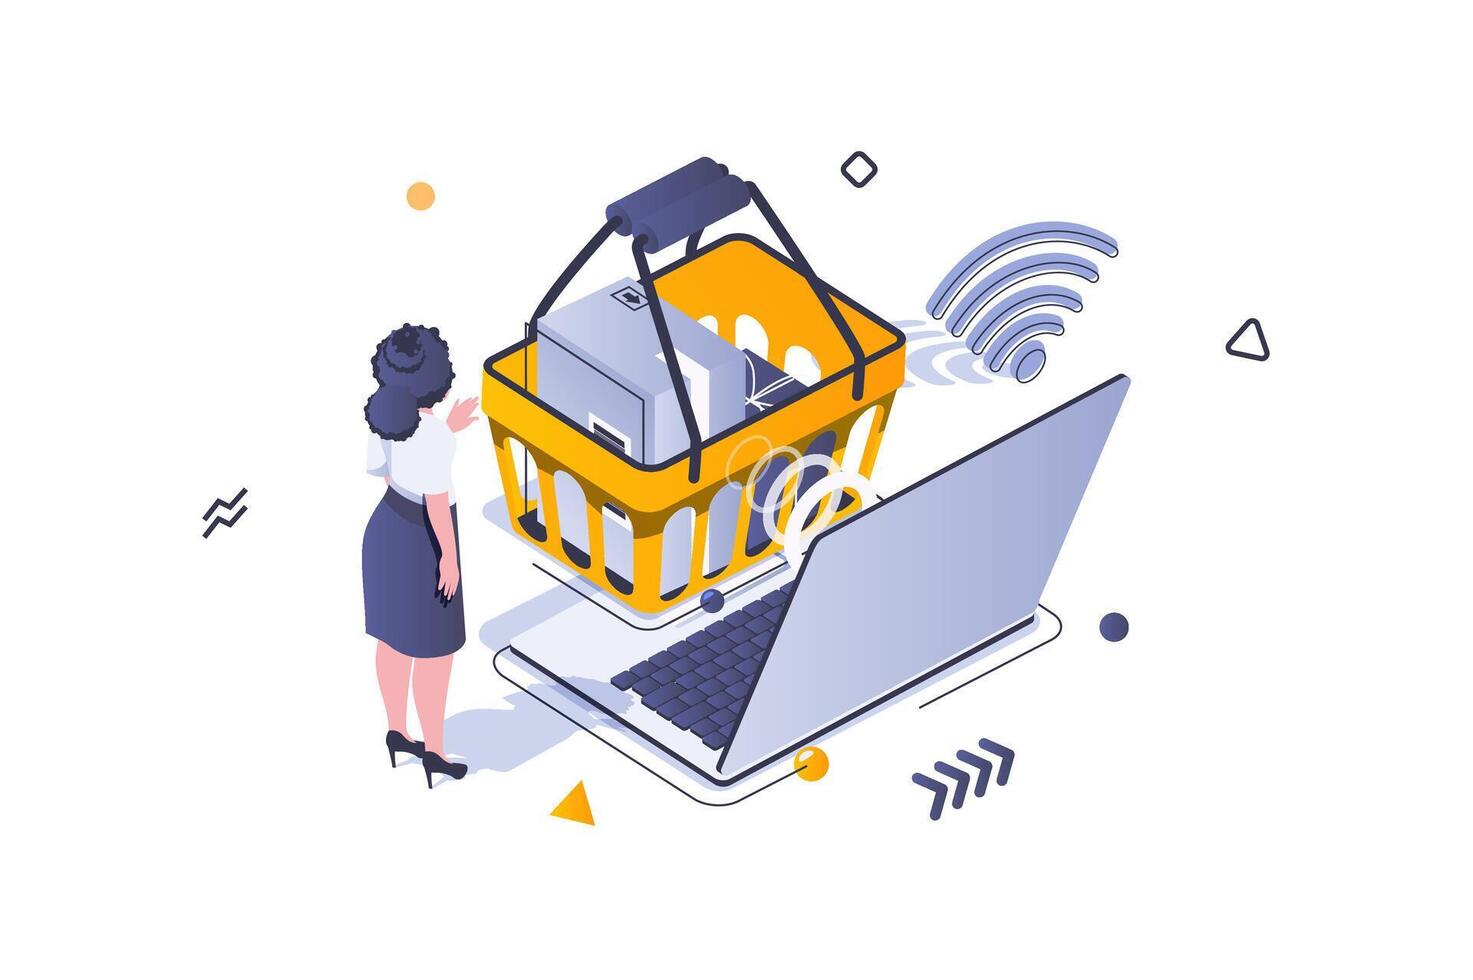 Online shopping concept in 3d isometric design. Woman buying new goods at supermarket and ordering delivery using store site at laptop. Vector illustration with isometric people scene for web graphic